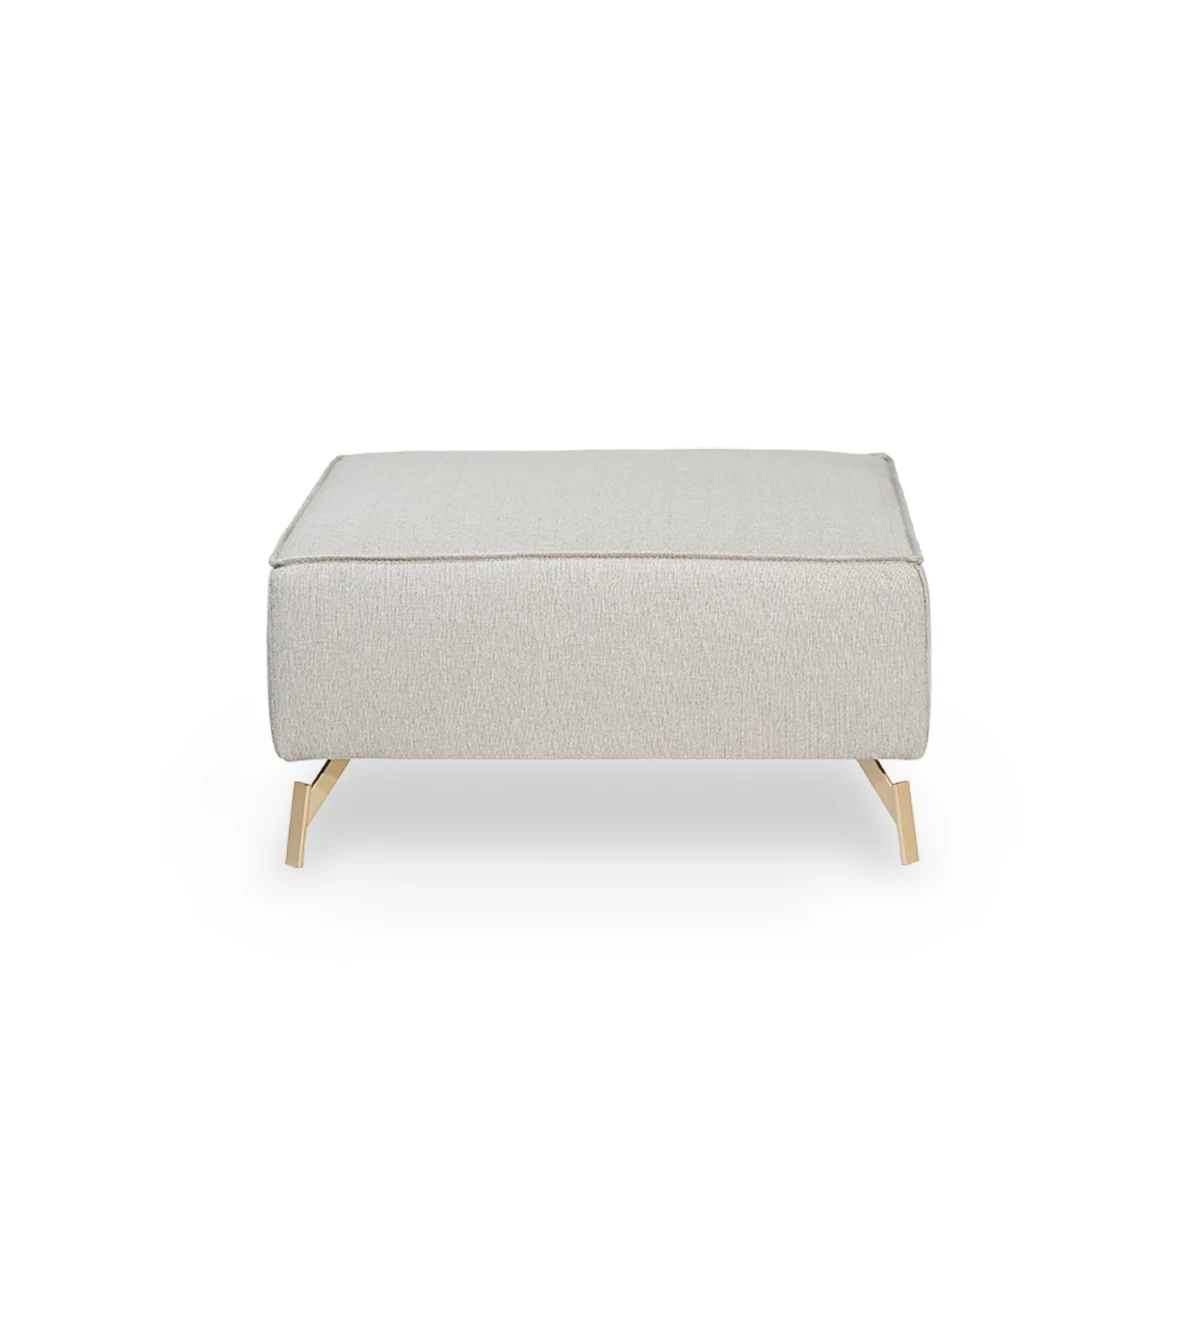 Upholstered in fabric, golden lacquered metal feet